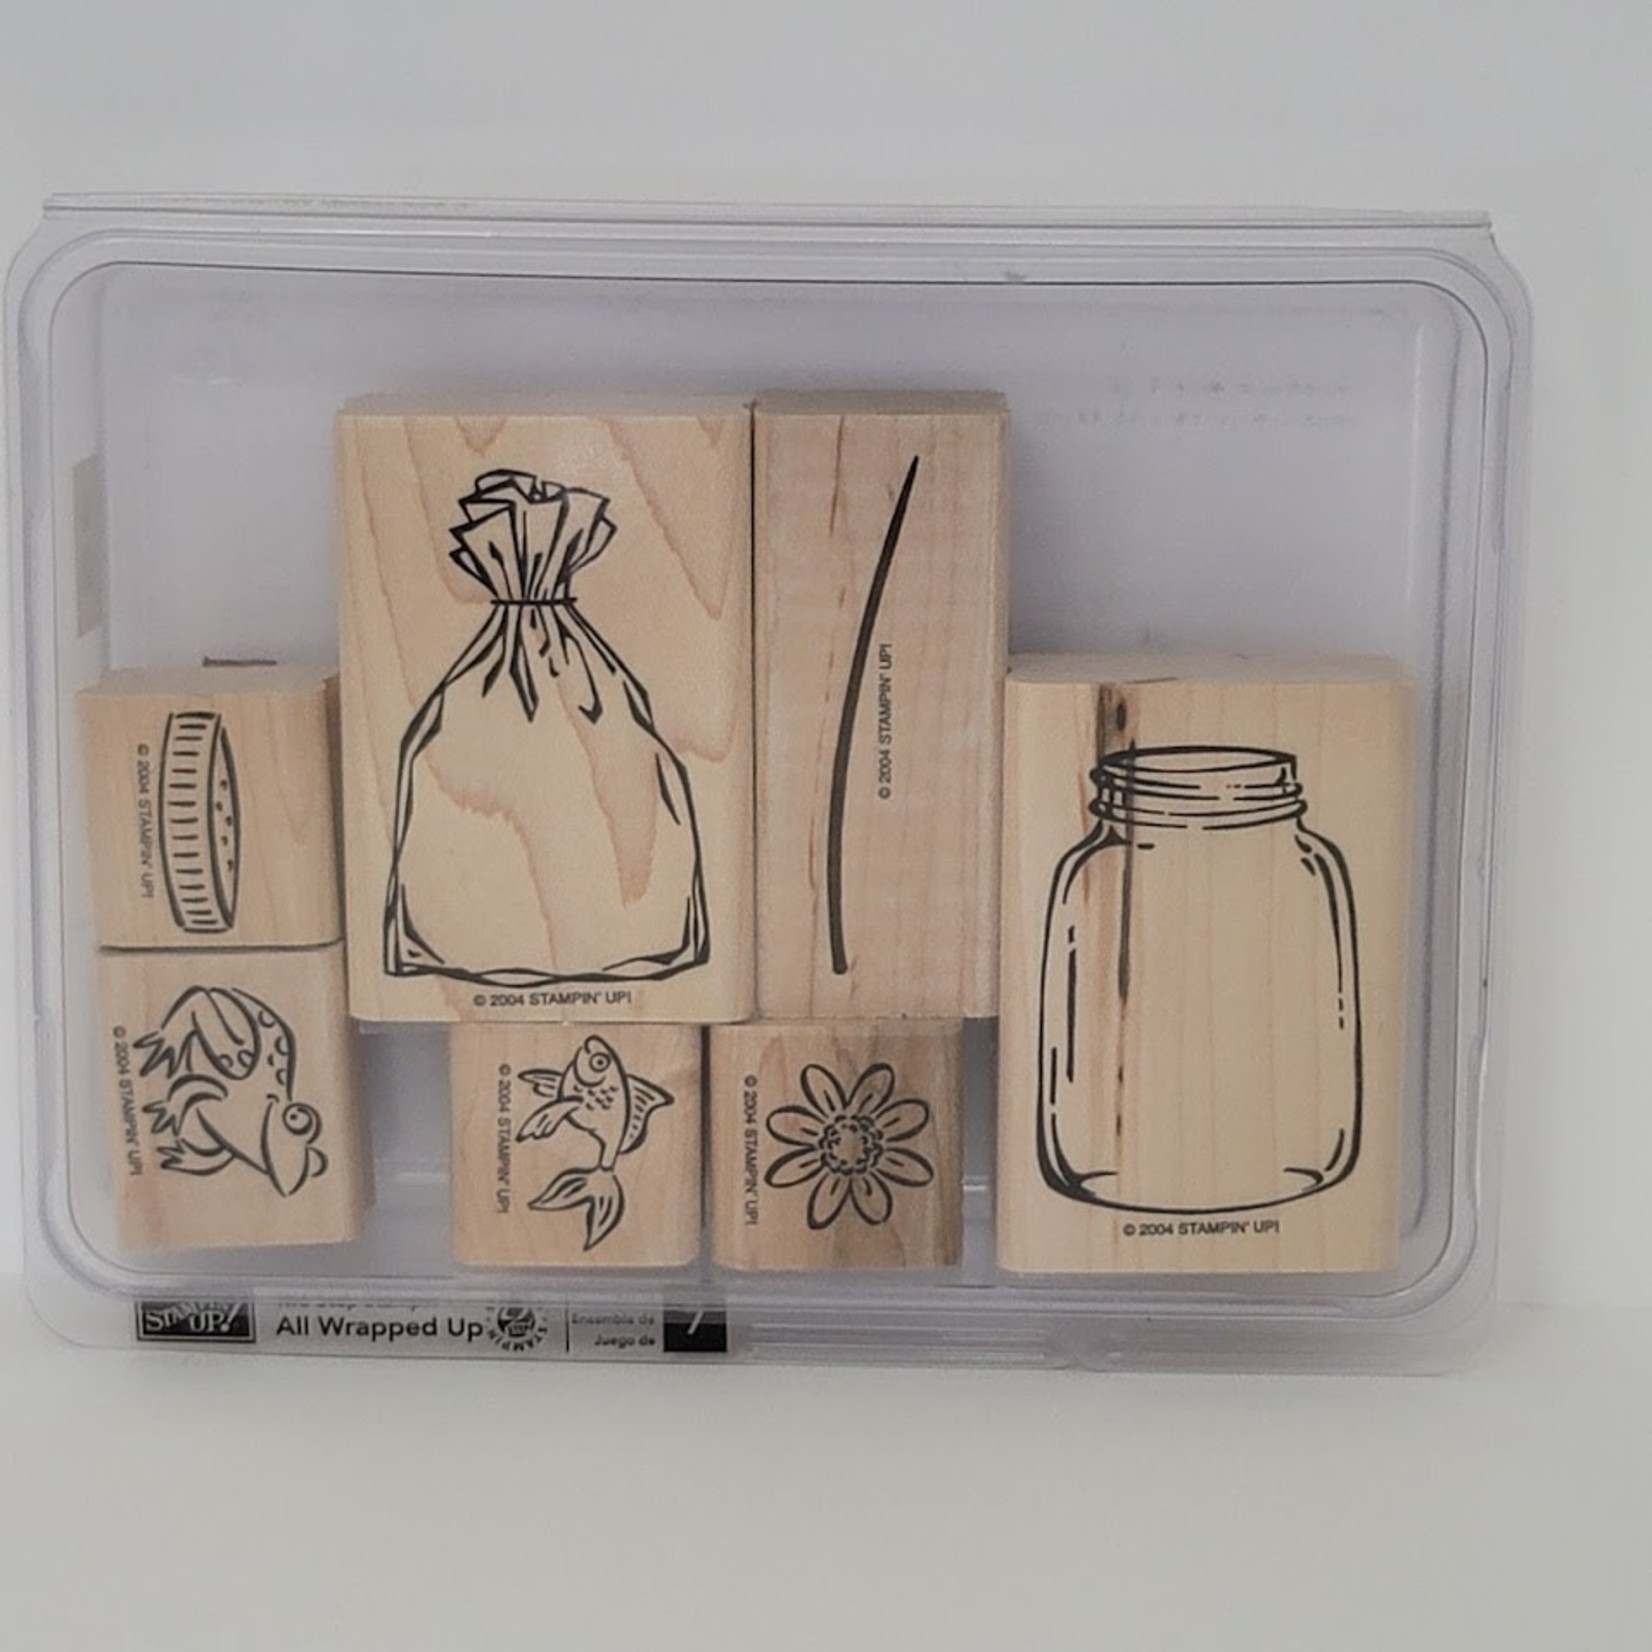 Stampin' Up Stampin' Up Block Stamp Set - All Wrapped Up